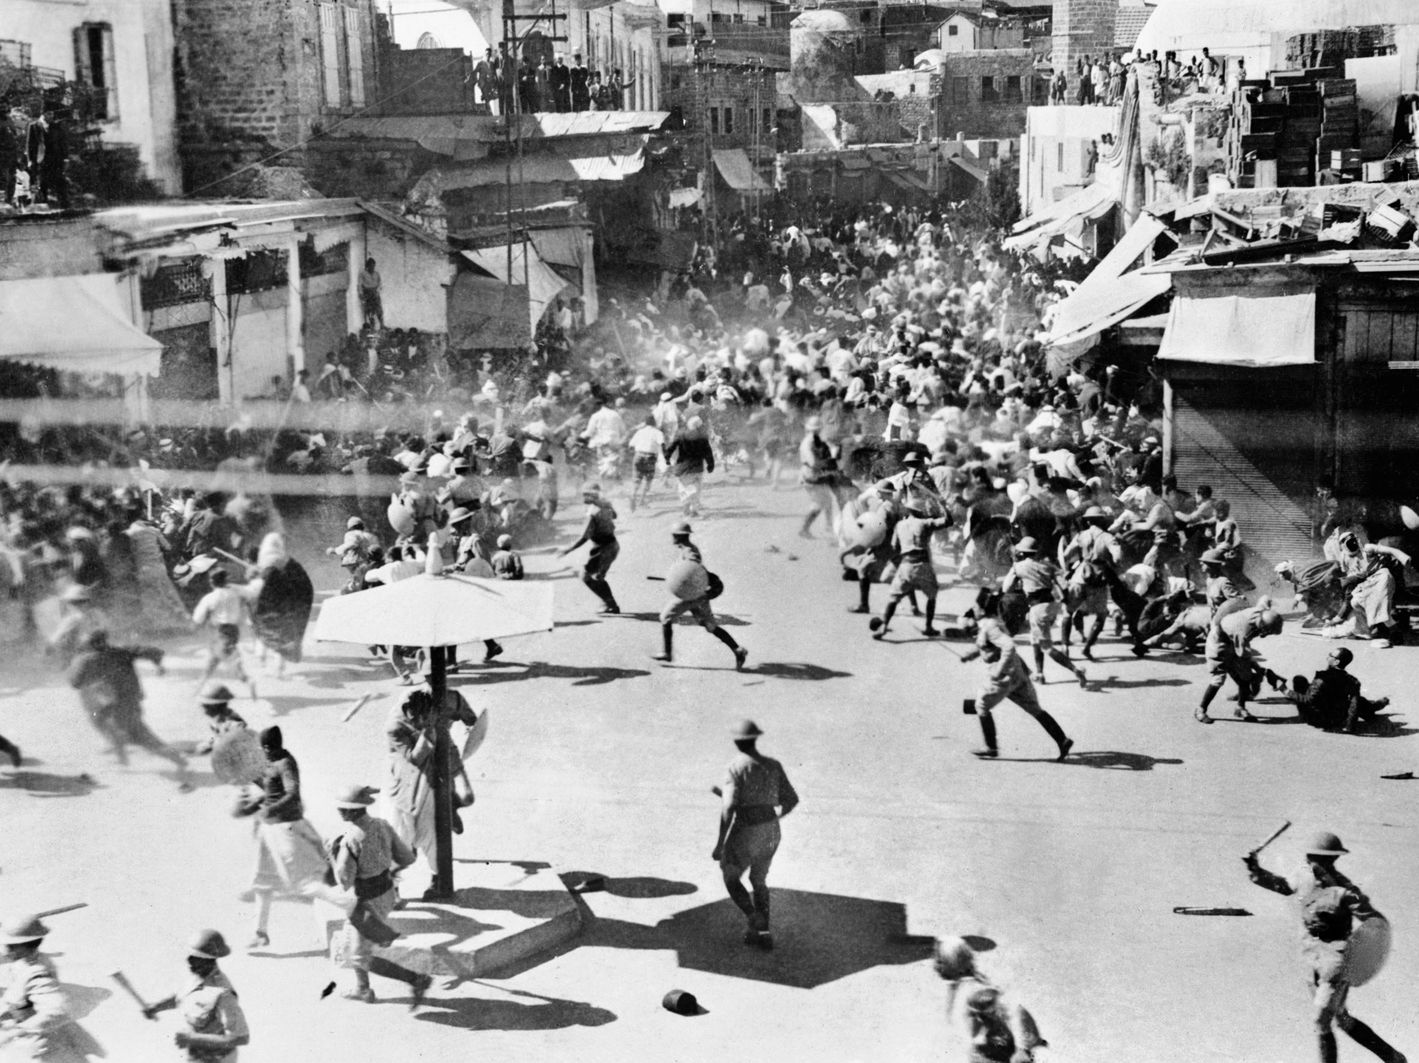 Club-wielding British troops force Palestinian rioters to disperse during a demonstration in 1933.